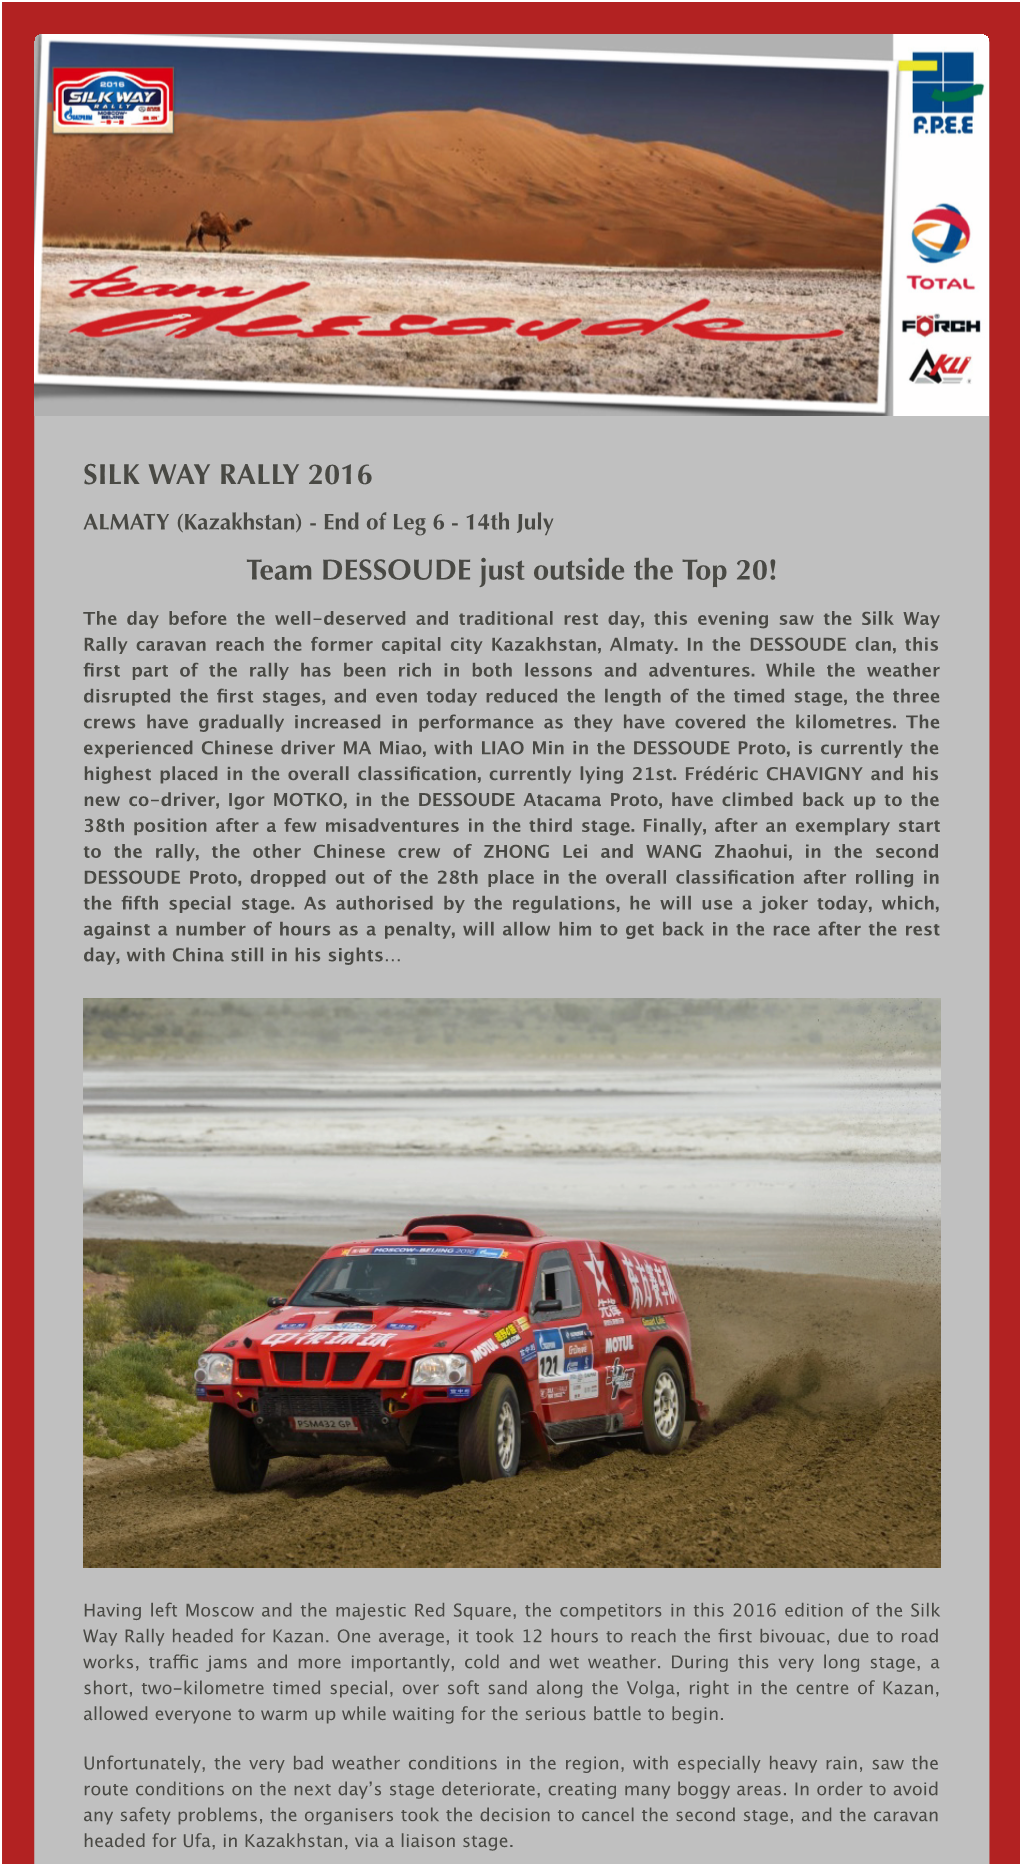 SILK WAY RALLY 2016 Team DESSOUDE Just Outside the Top